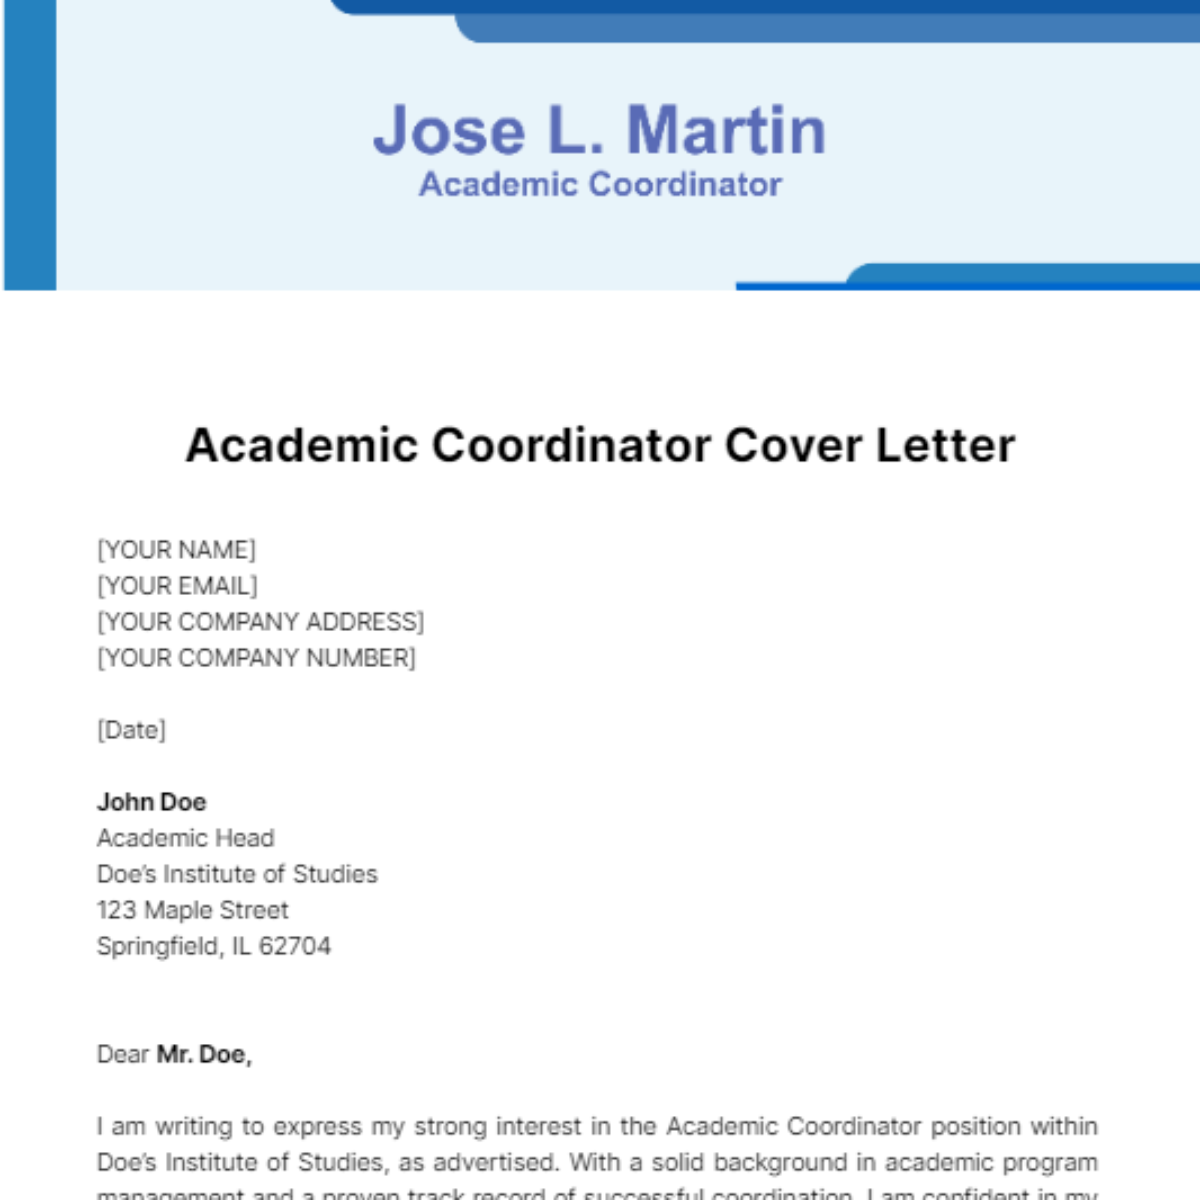 Academic Coordinator Cover Letter Template